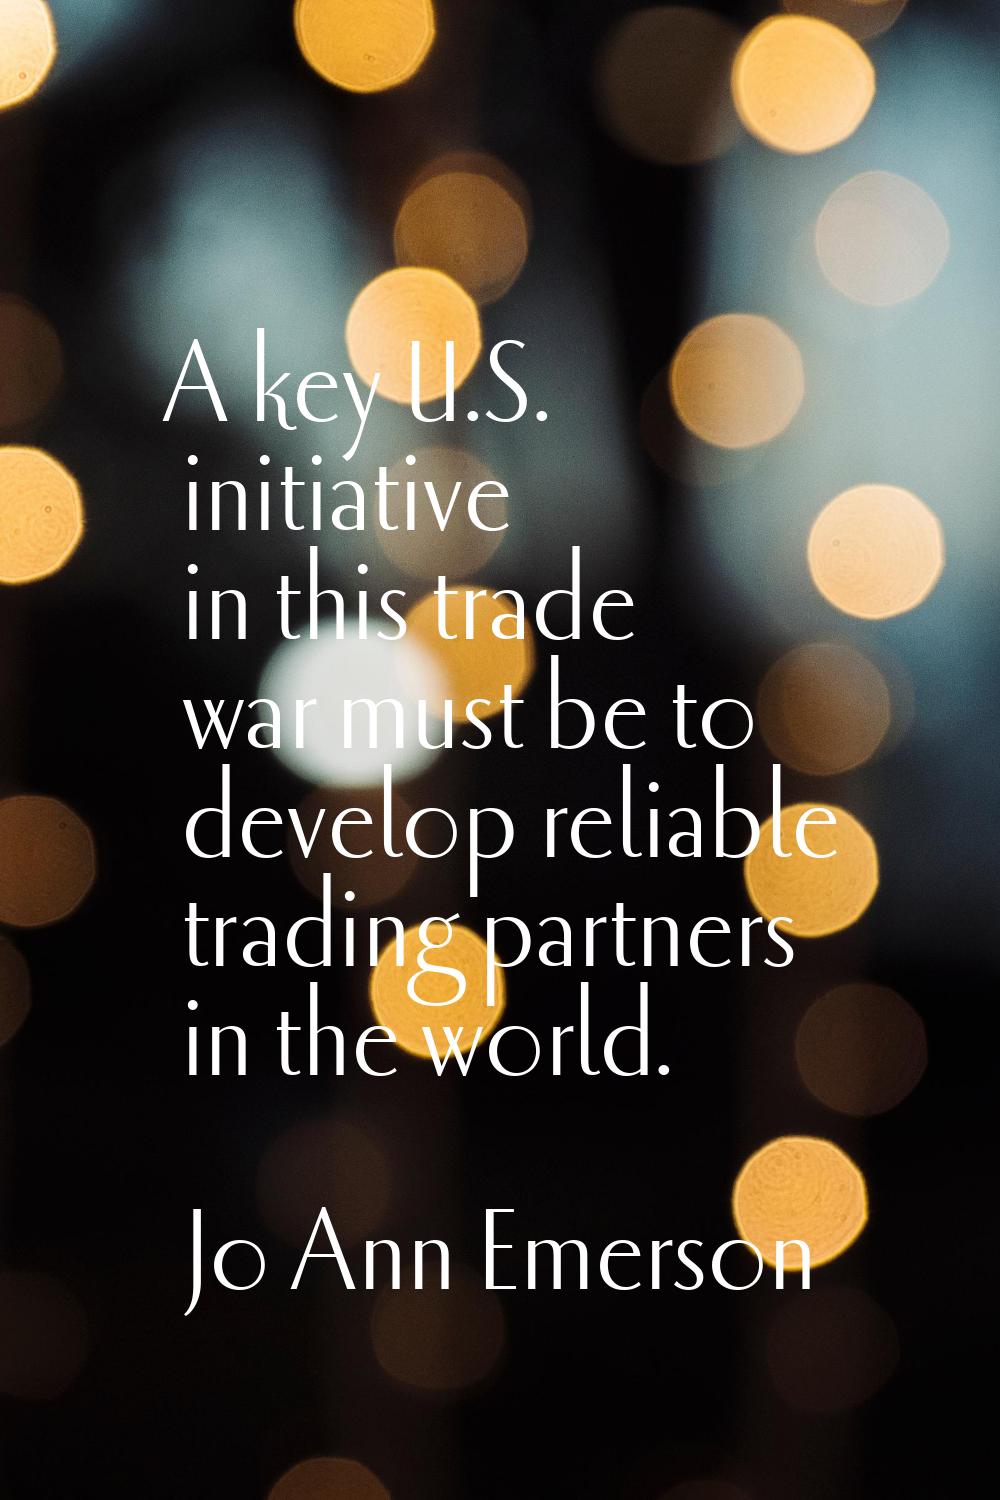 A key U.S. initiative in this trade war must be to develop reliable trading partners in the world.